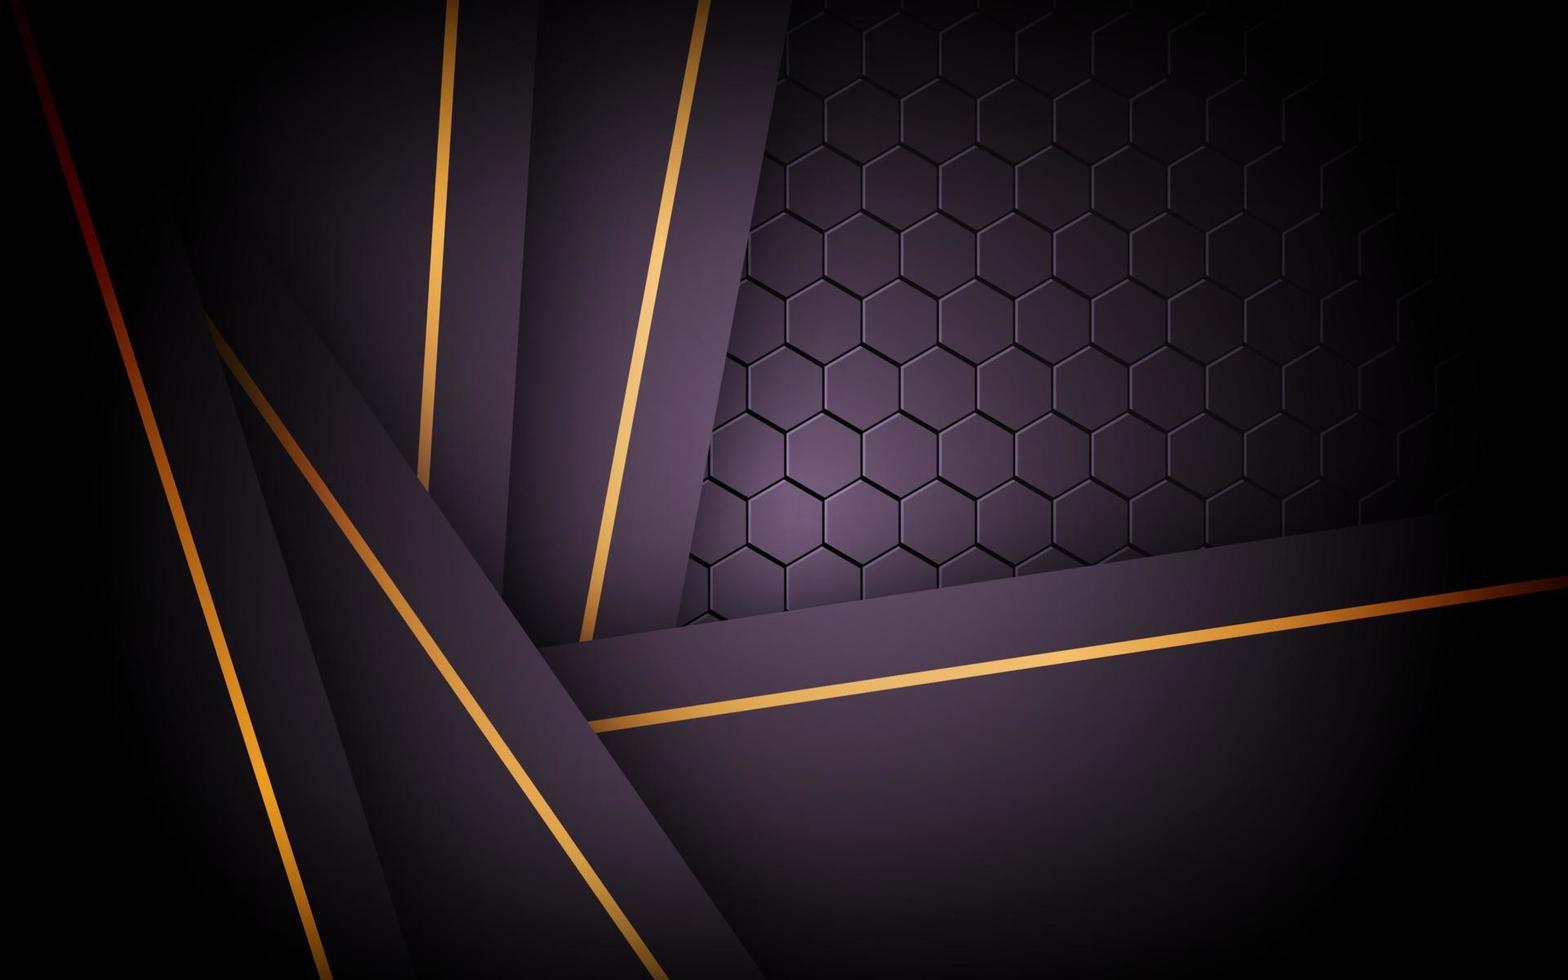 dark abstract black light background gradient shapes with hexagon mesh pattern decoration. vector